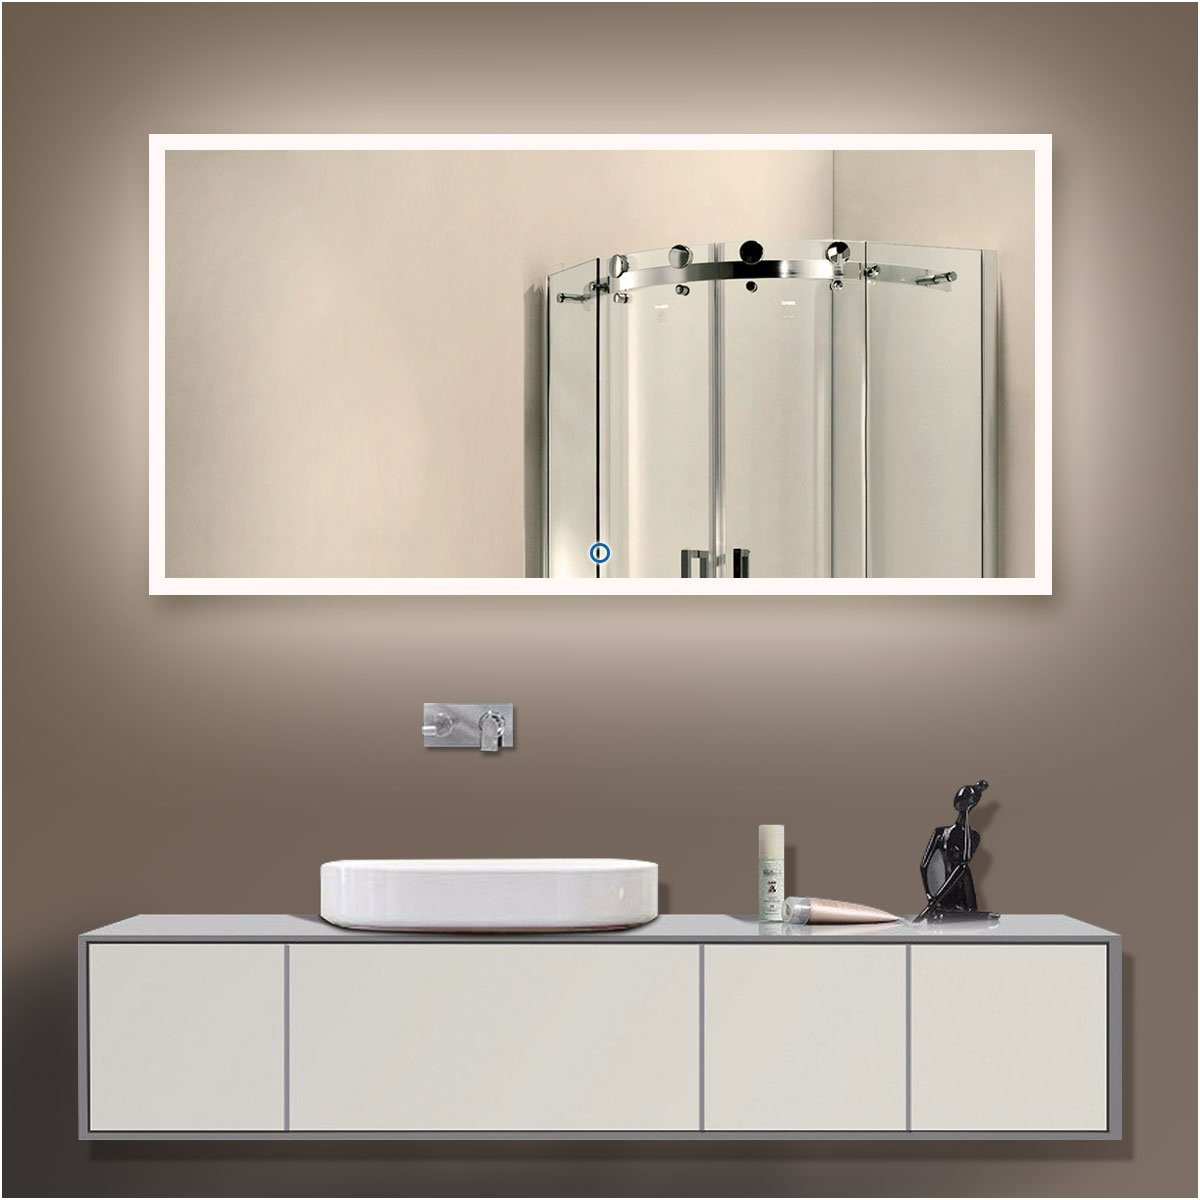 Awesome Bathroom Mirrors with Lights and Shelf